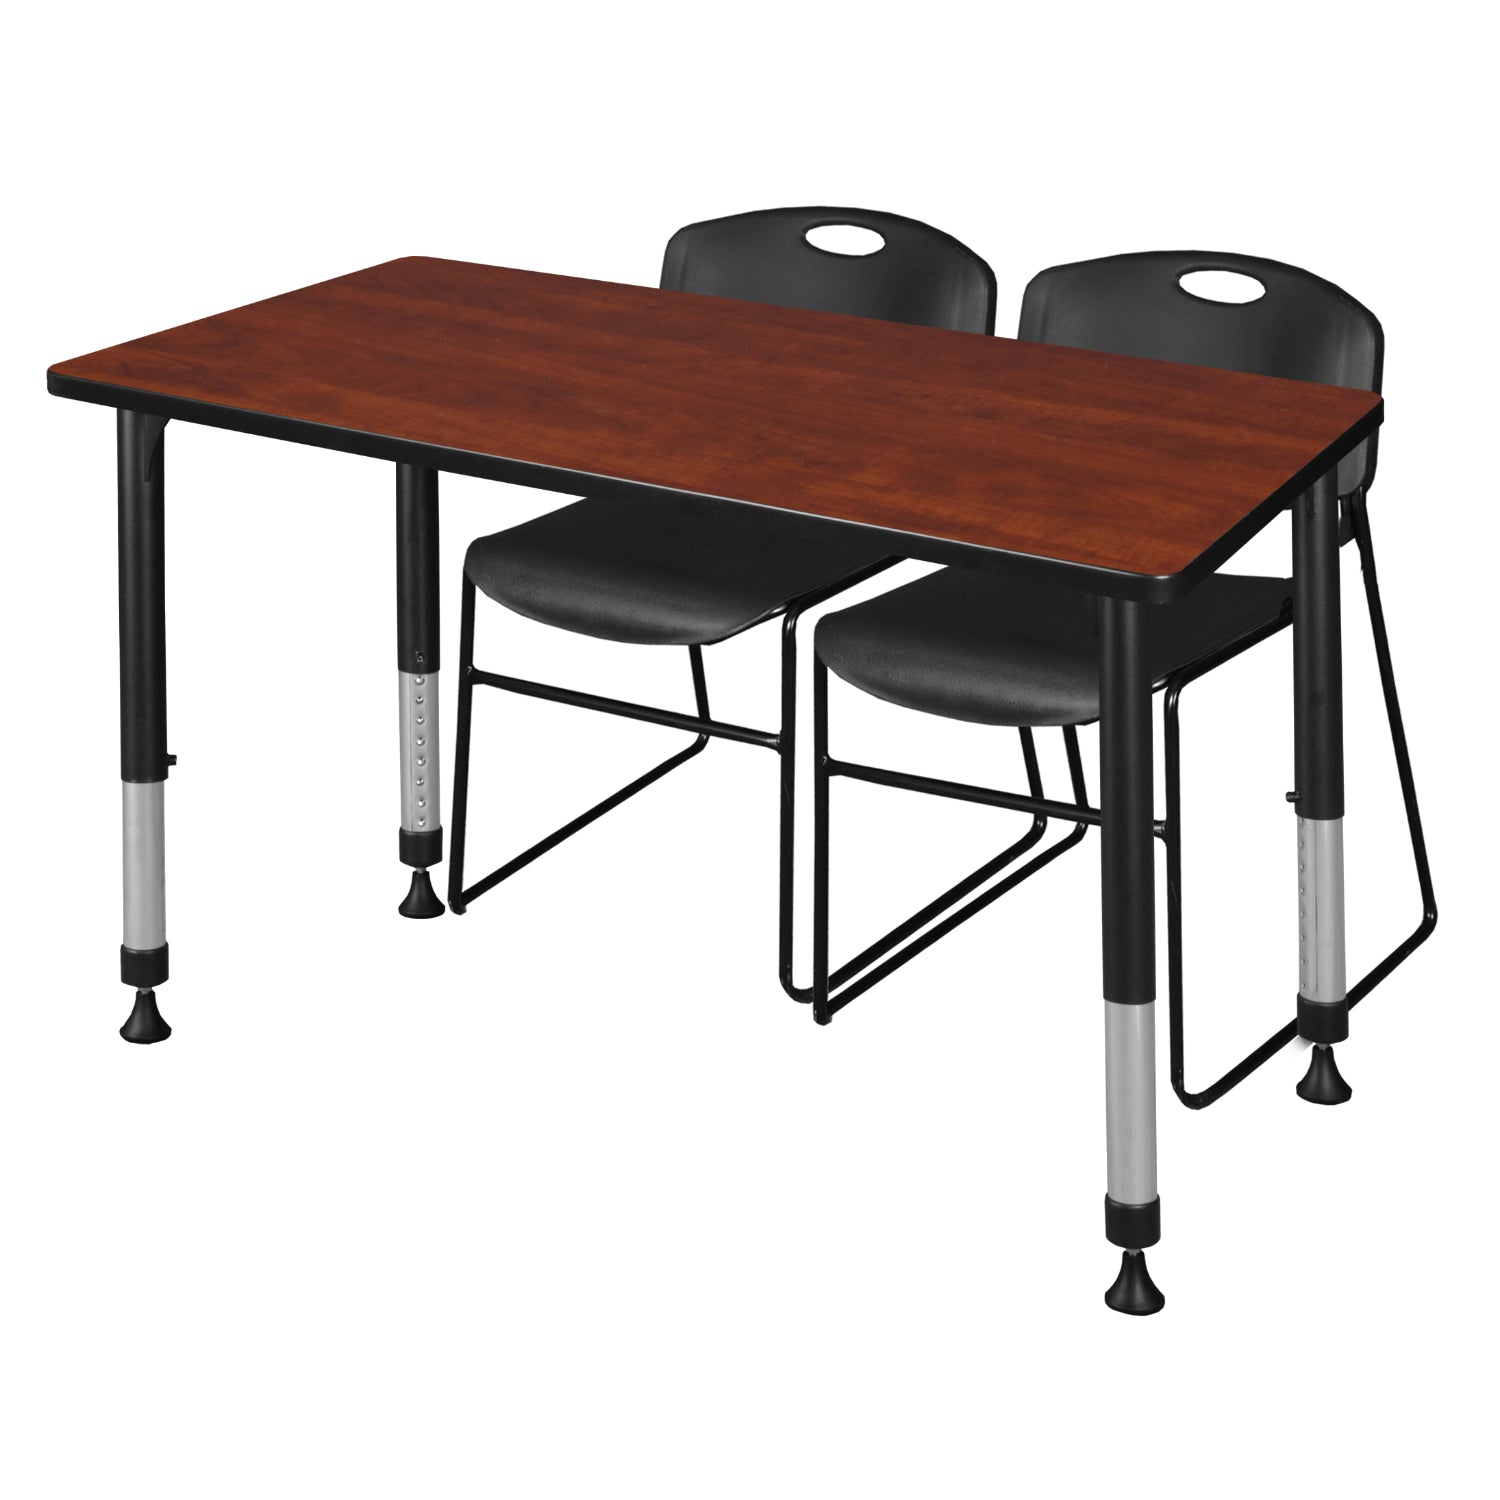 Kee Classroom Table and Chair Package, Kee 48" x 24" Rectangular Adjustable Height Table with 2 Black Zeng Stack Chairs